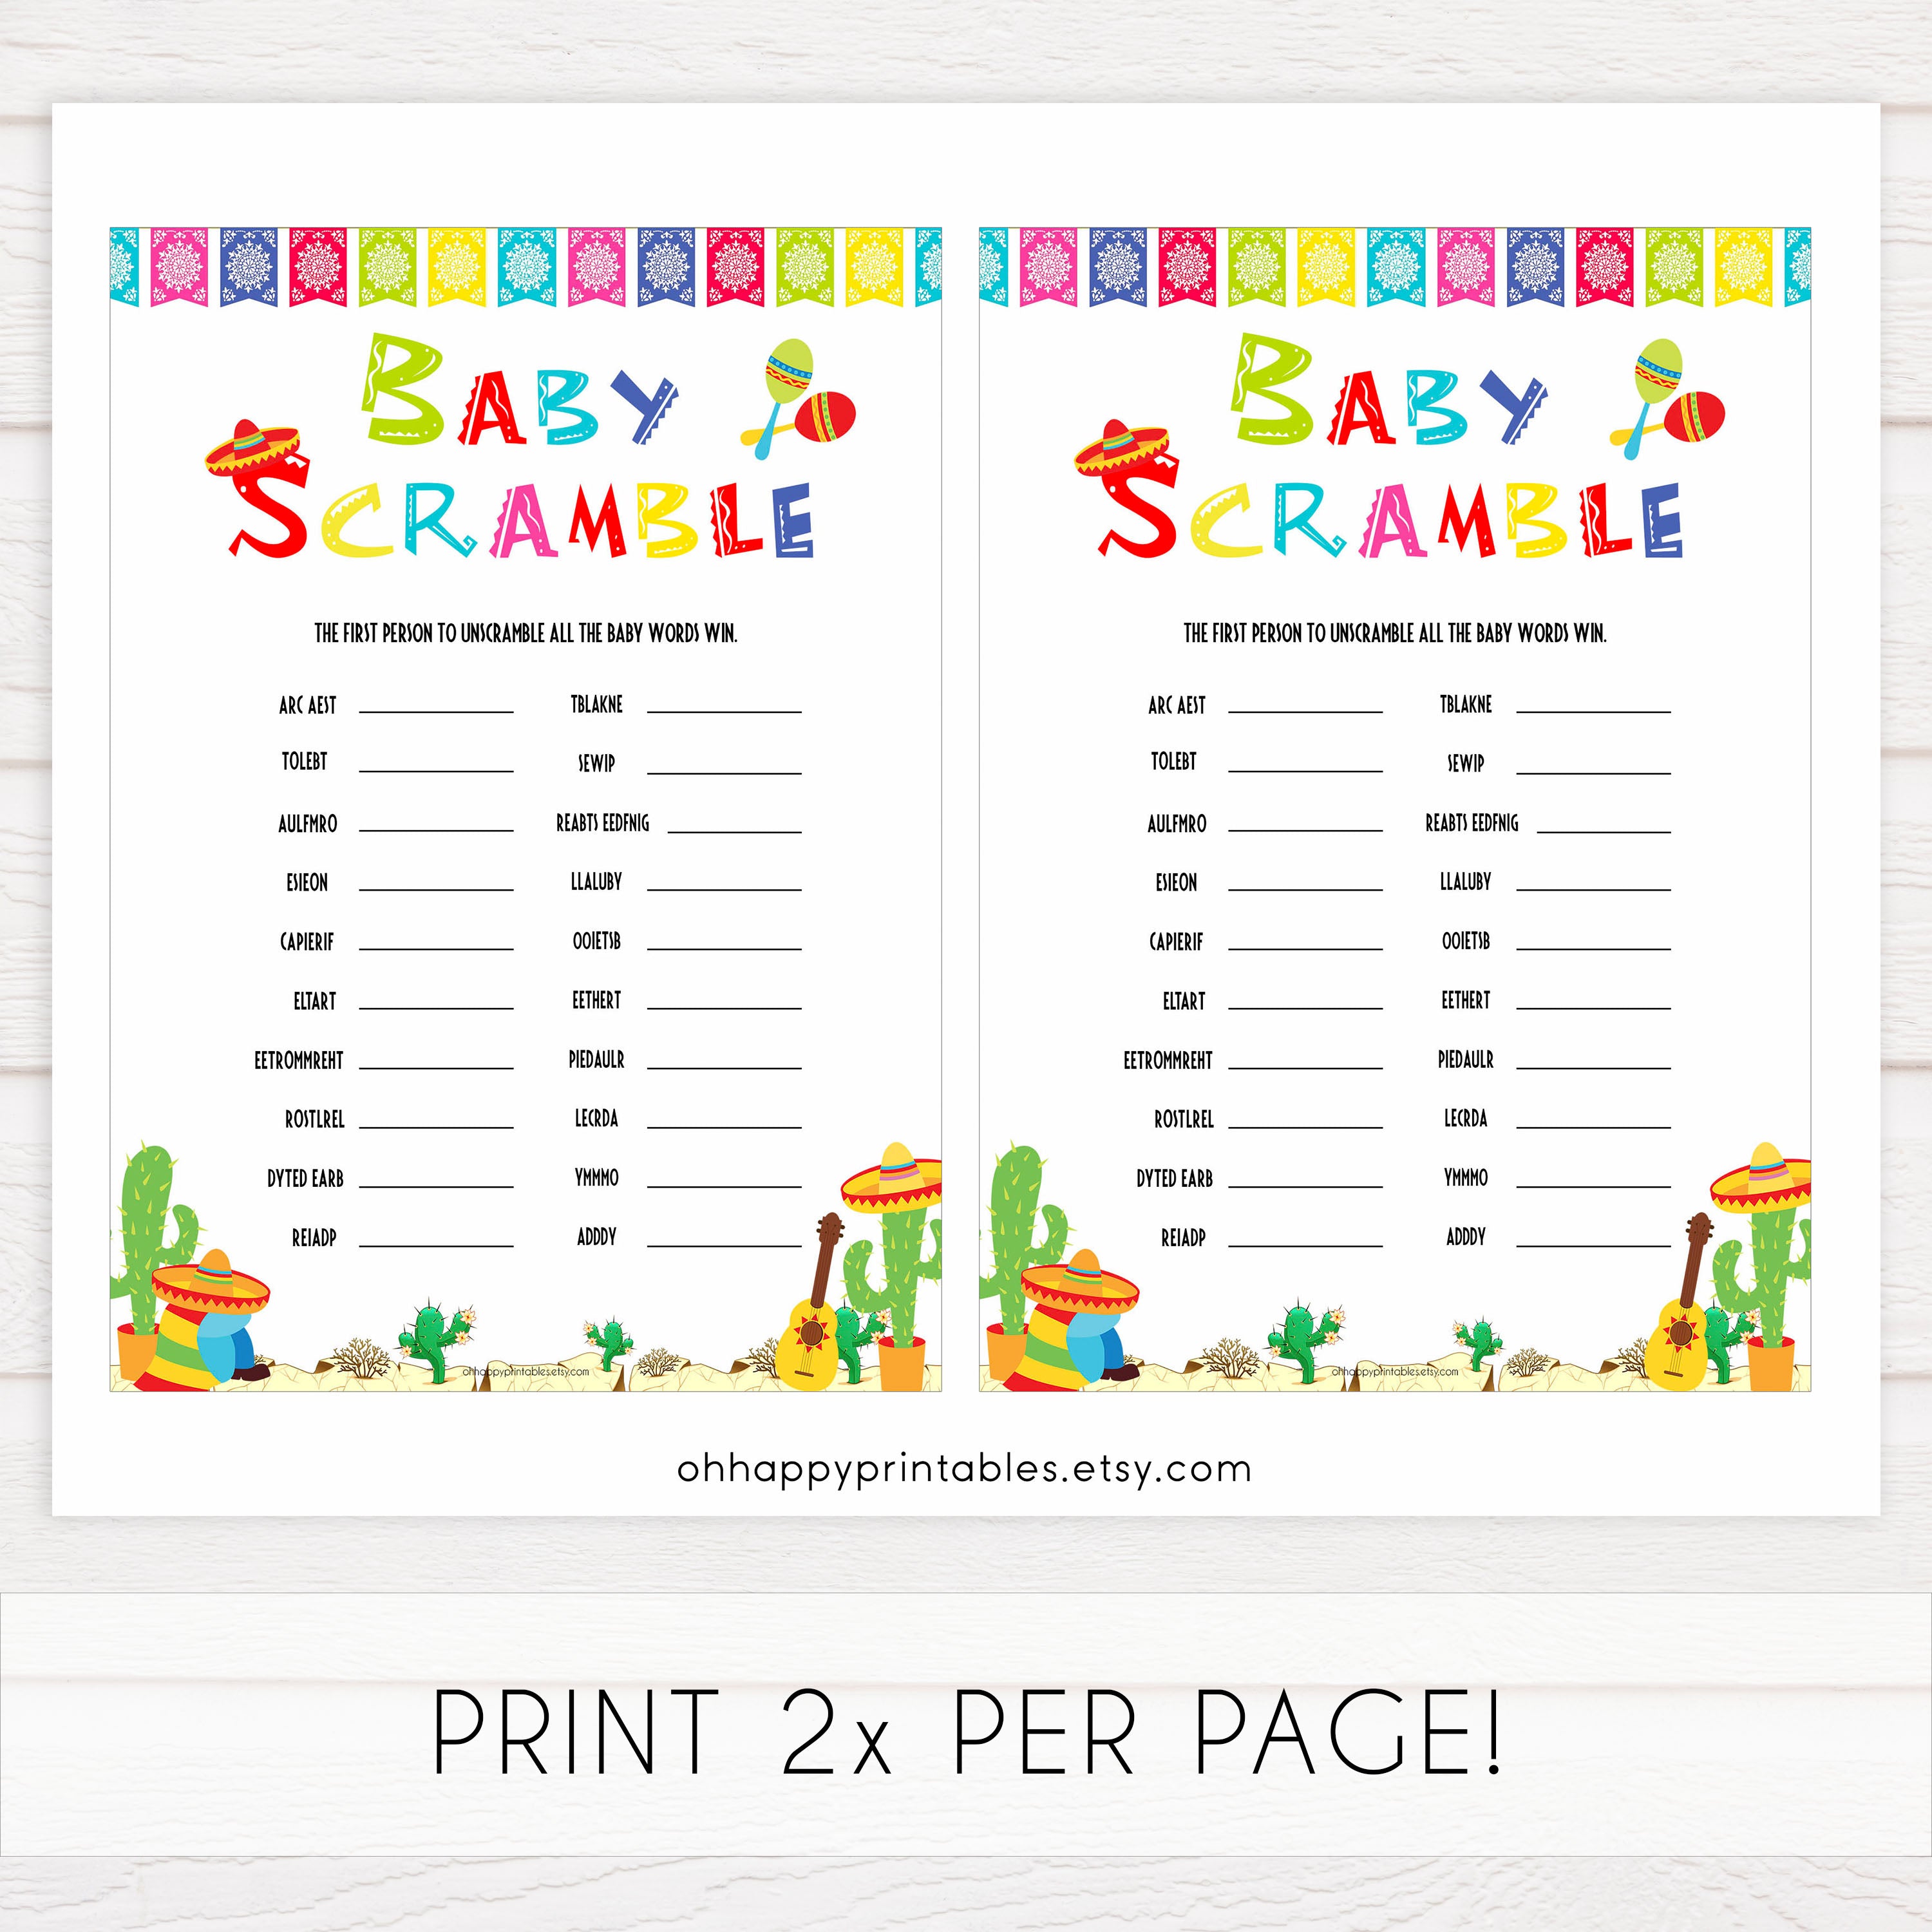 baby shower scramble, baby word jumble, Printable baby shower games, Mexican fiesta fun baby games, baby shower games, fun baby shower ideas, top baby shower ideas, fiesta shower baby shower, fiesta baby shower ideas